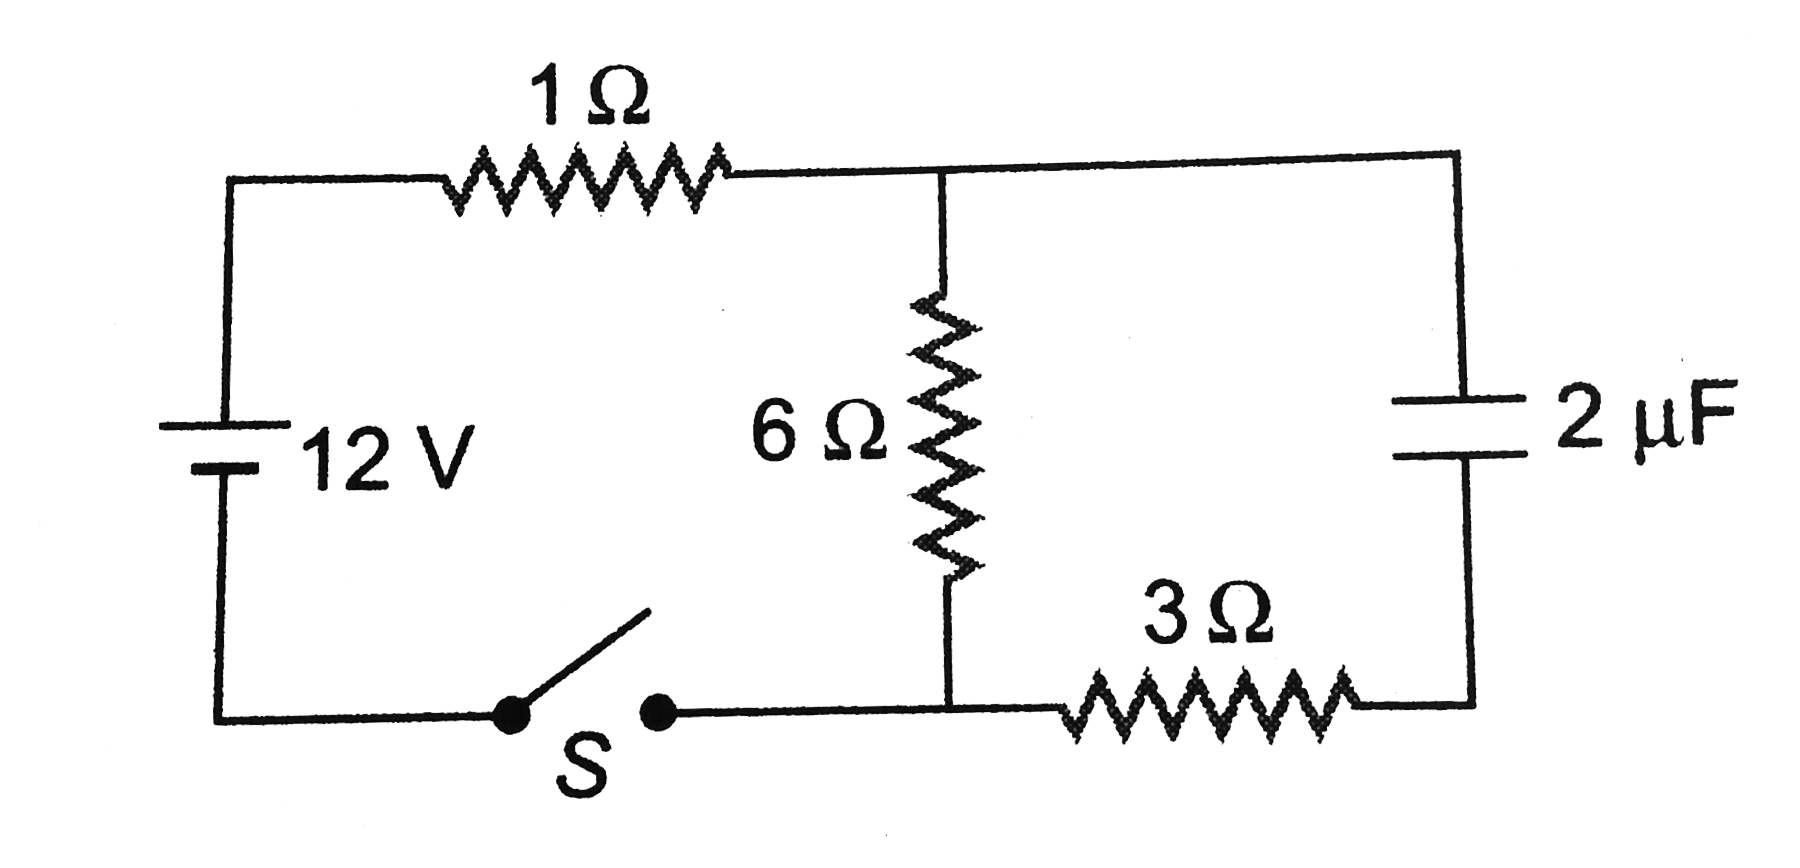 When the switch is closed, the initial current through the 1Omega resistor is